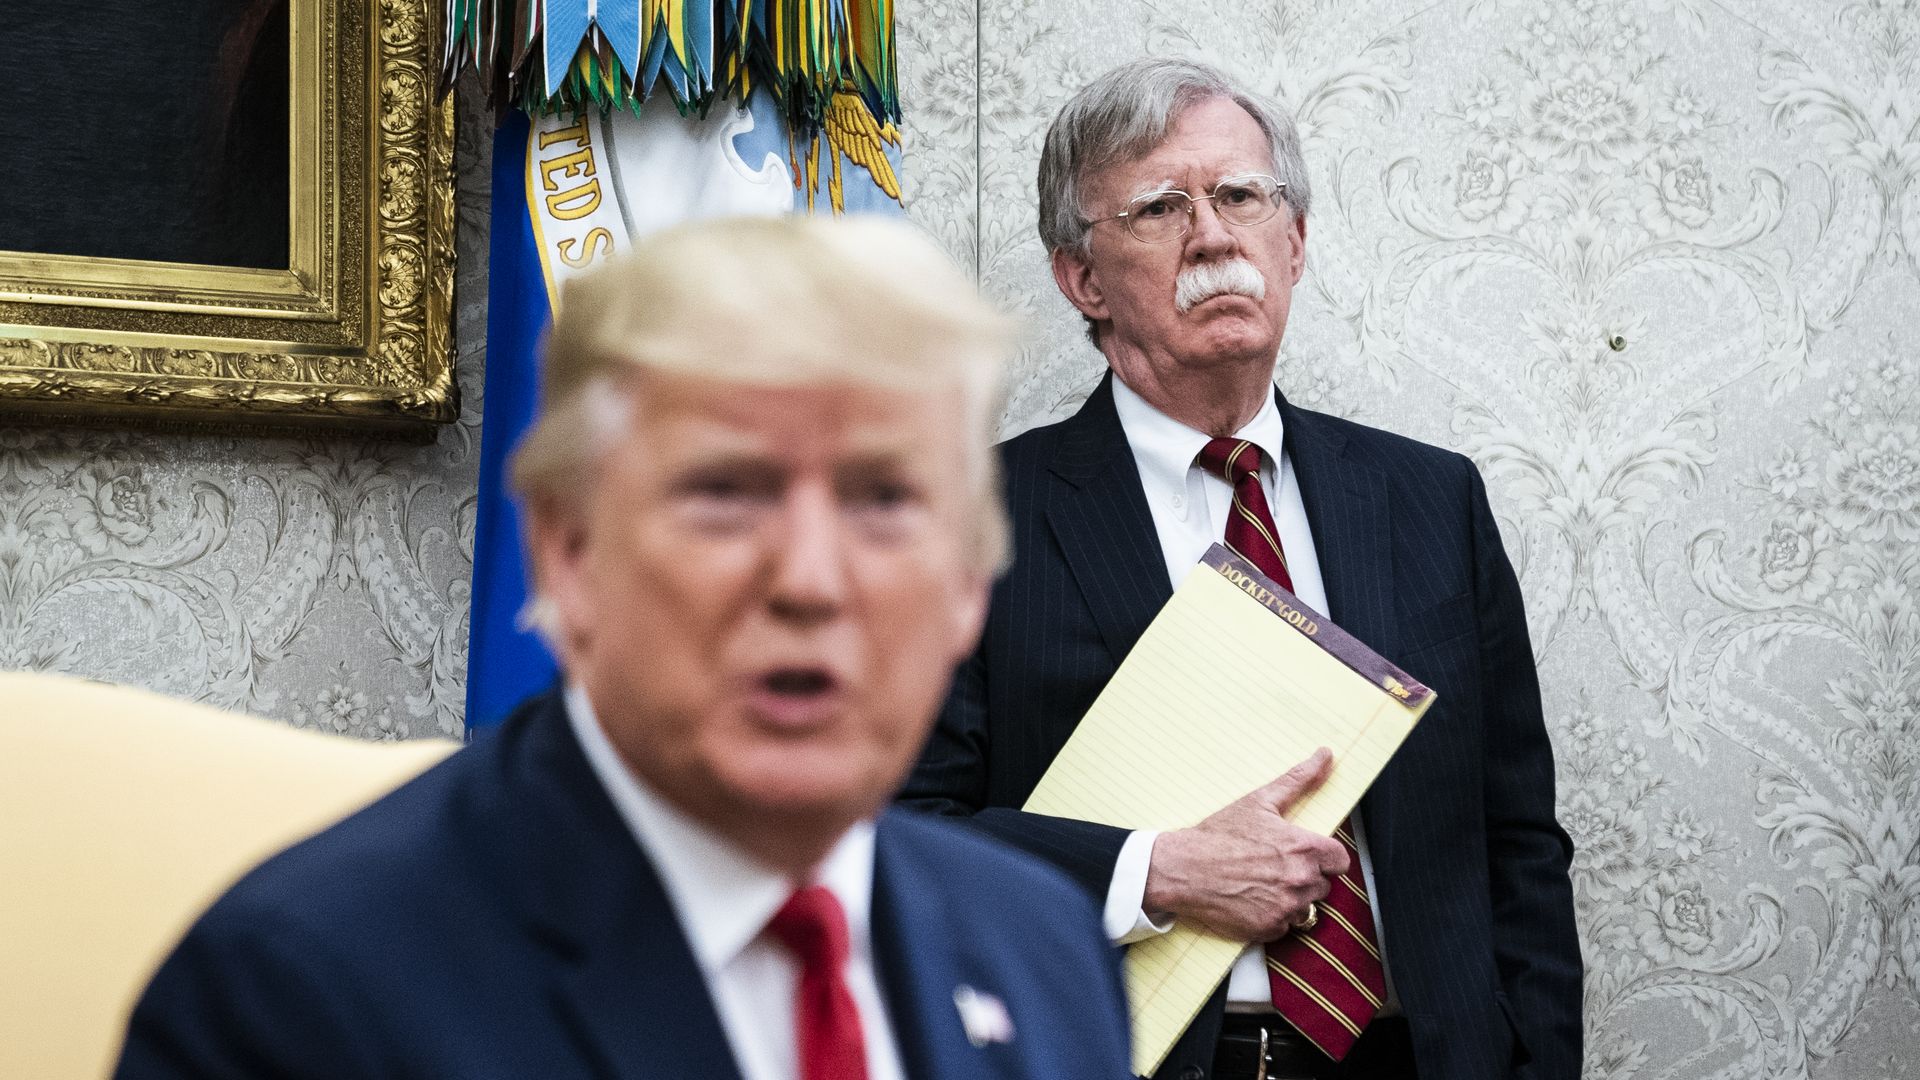 Bolton standing behind Trump